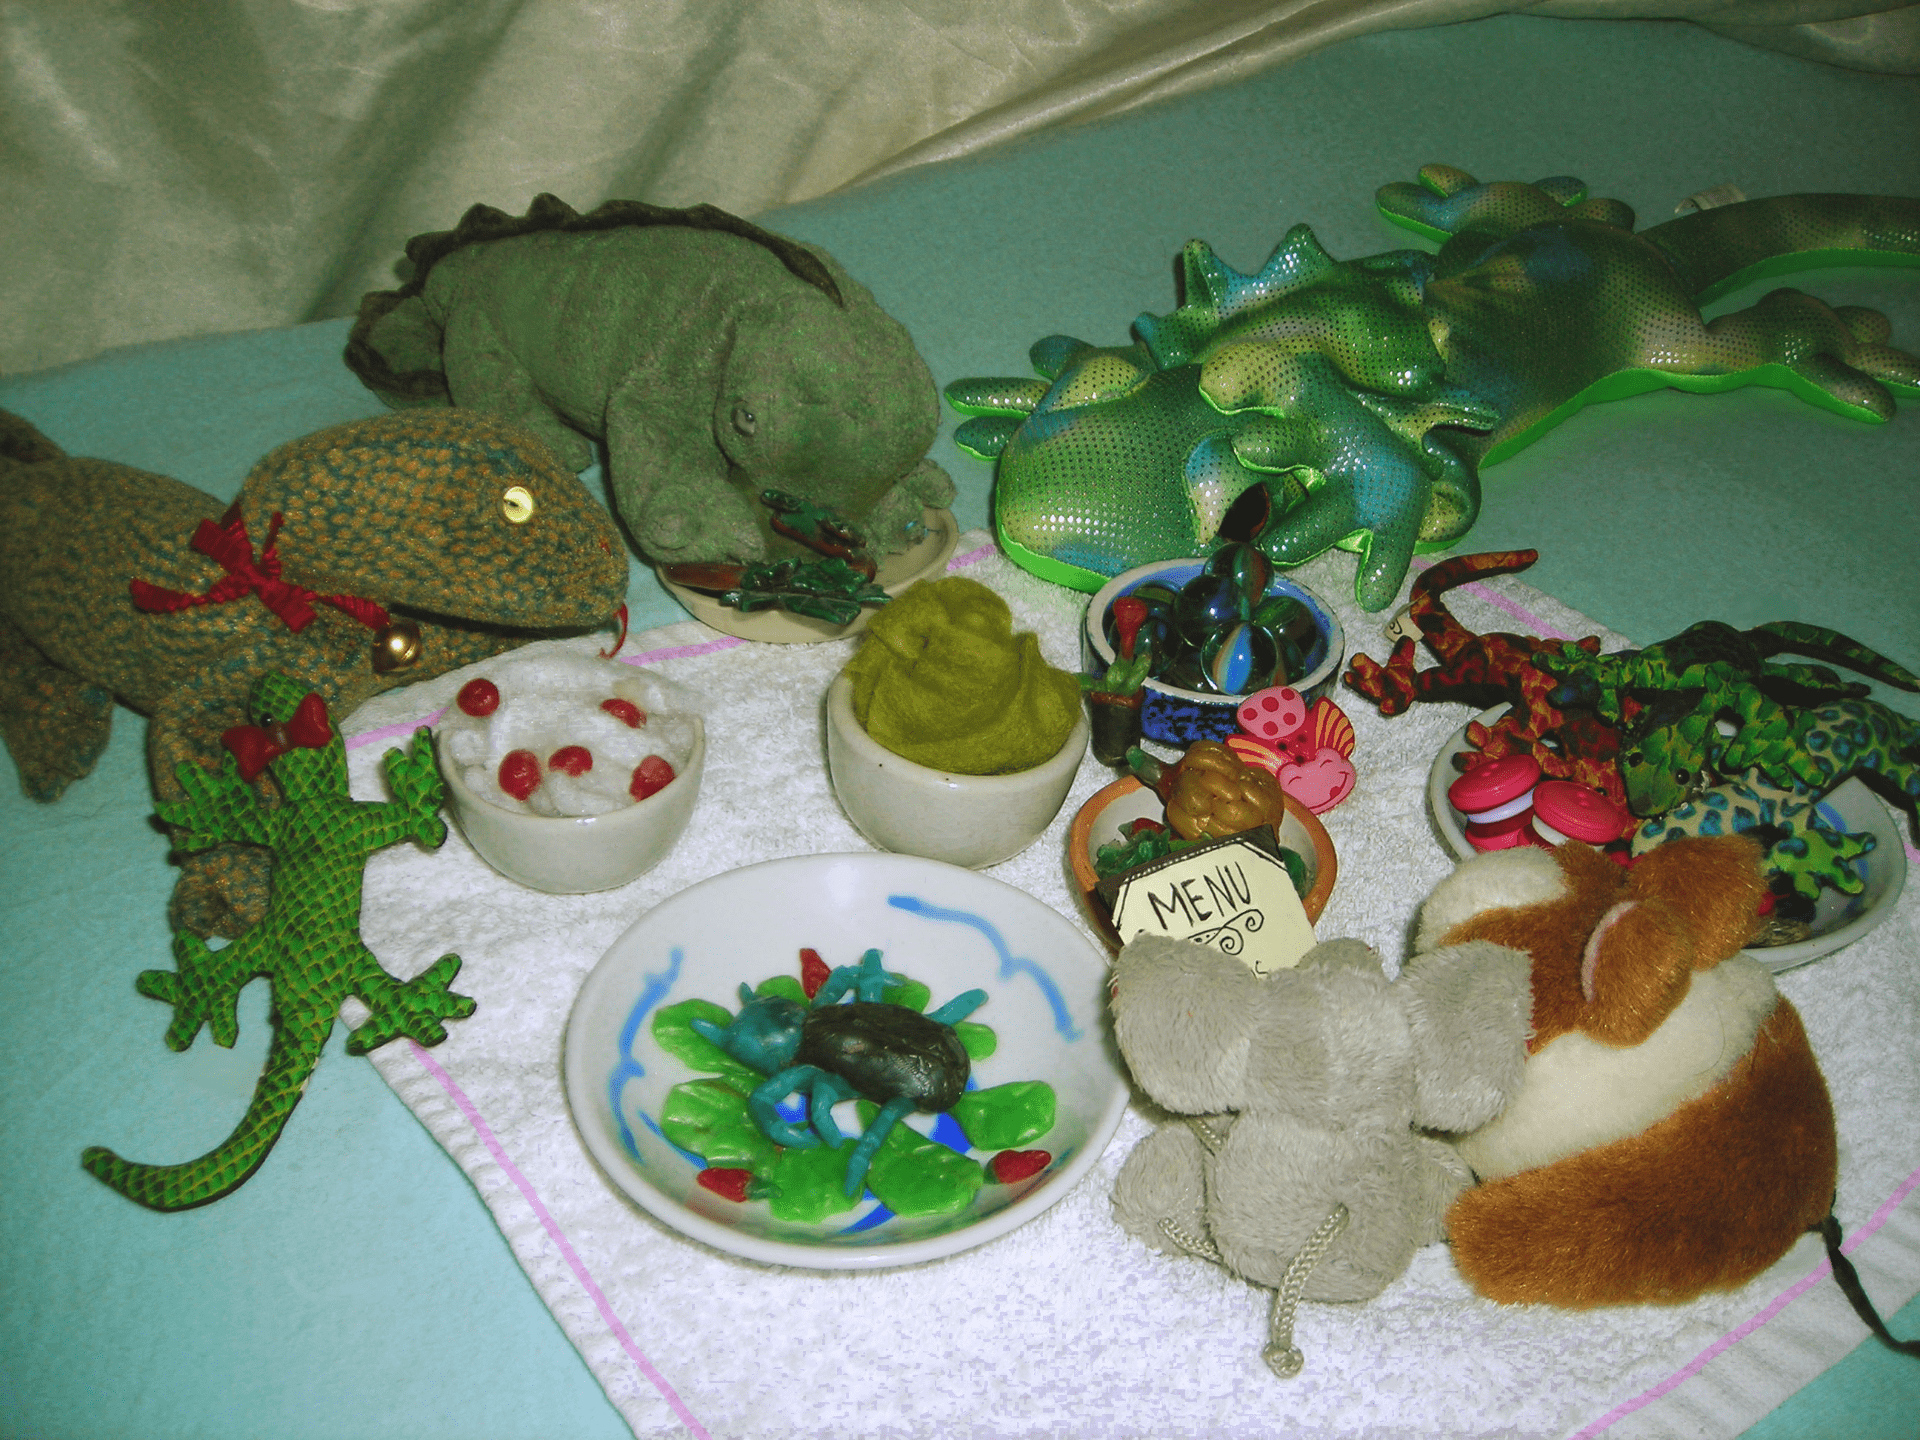 A selection of toy lizards enjoying a picnic.